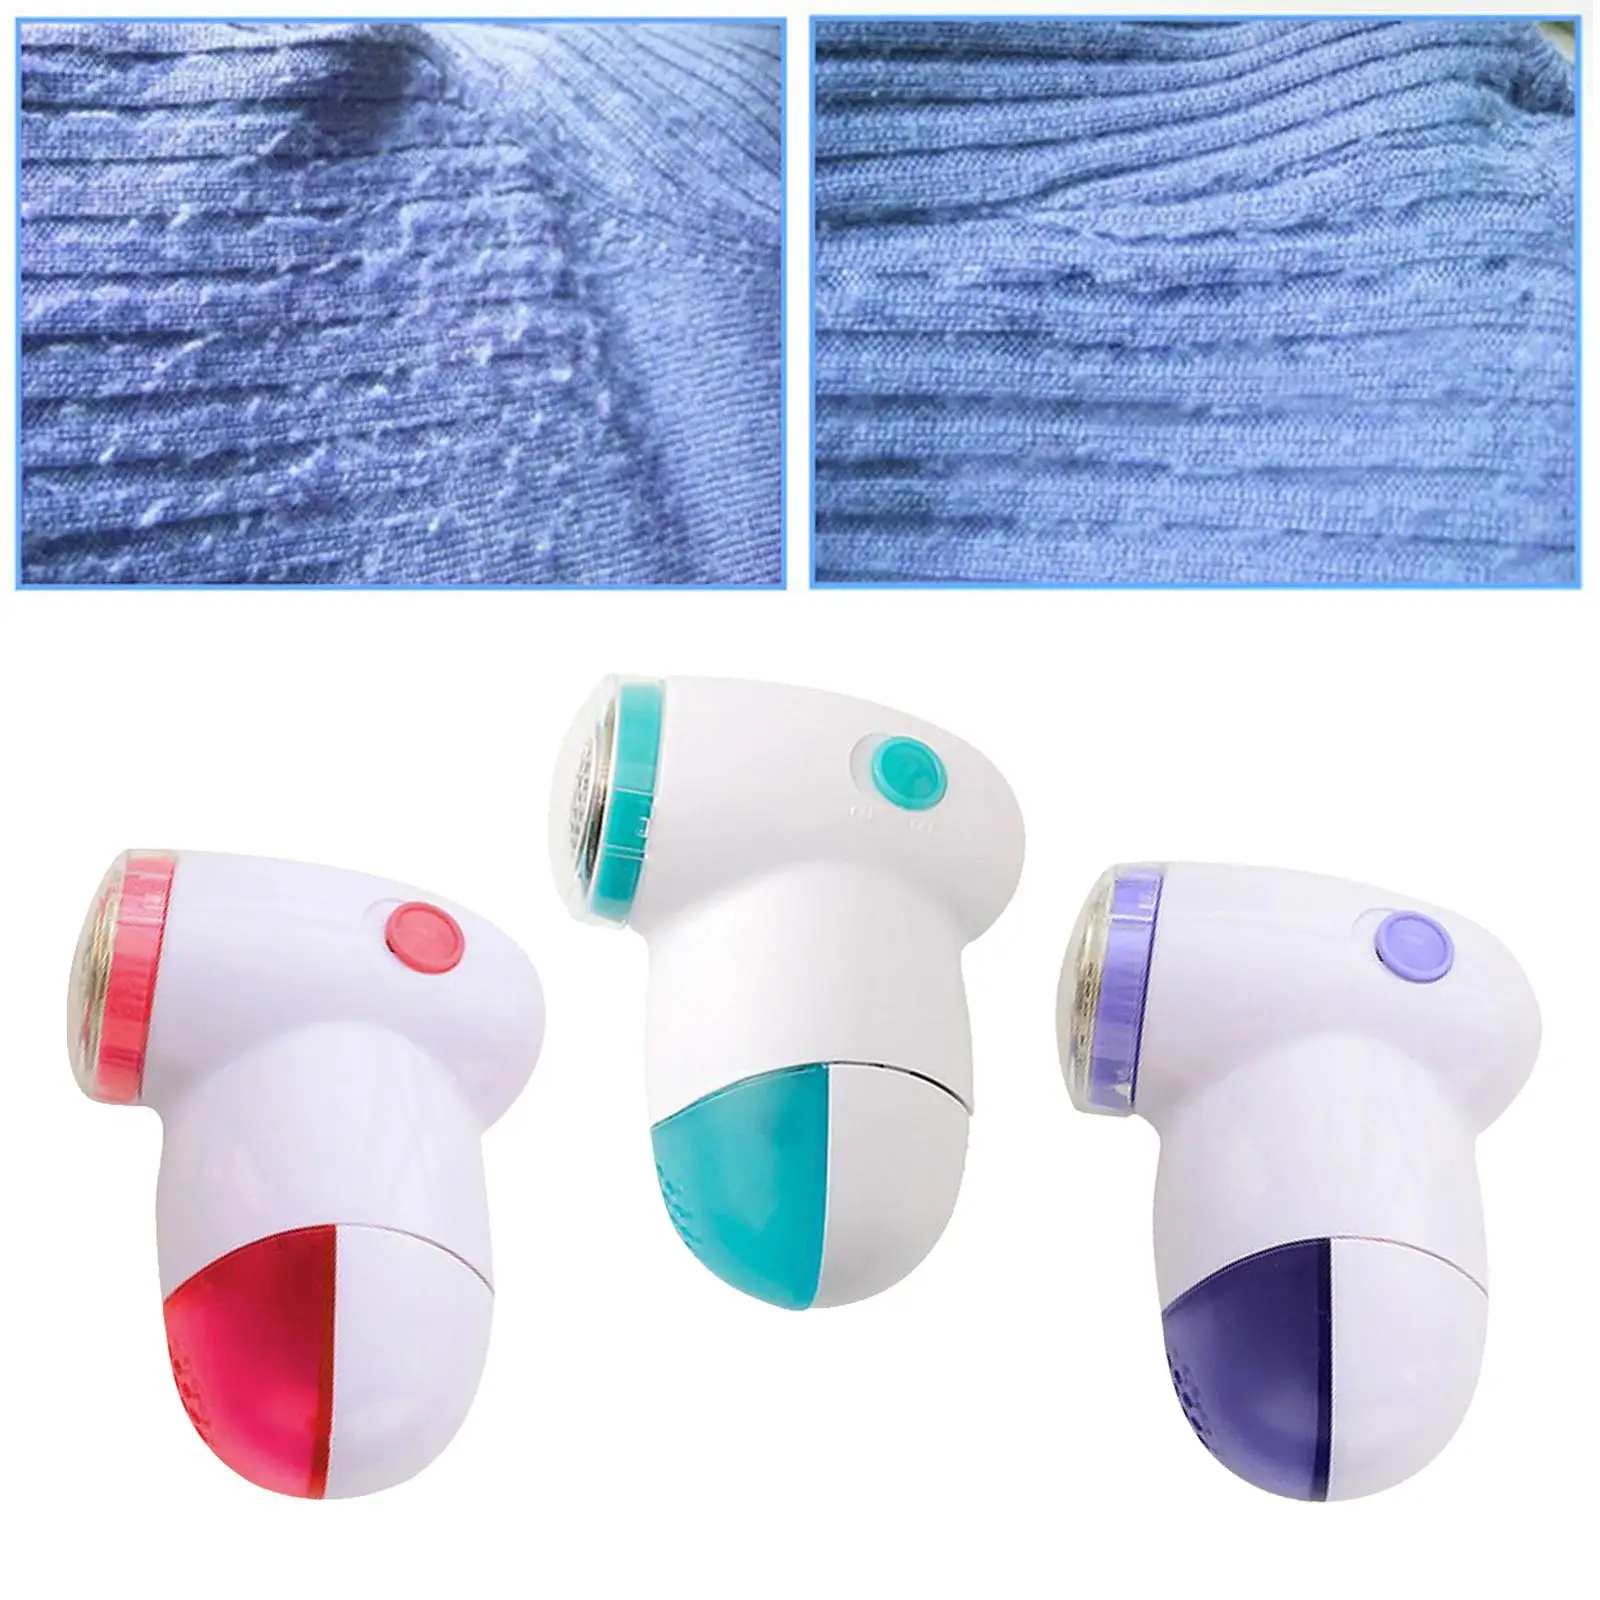 Electric Mini Fuzz Remover Visible Box Supplies Hair Ball Removal Machine for Blanket Carpets Blanket Furniture Clothes